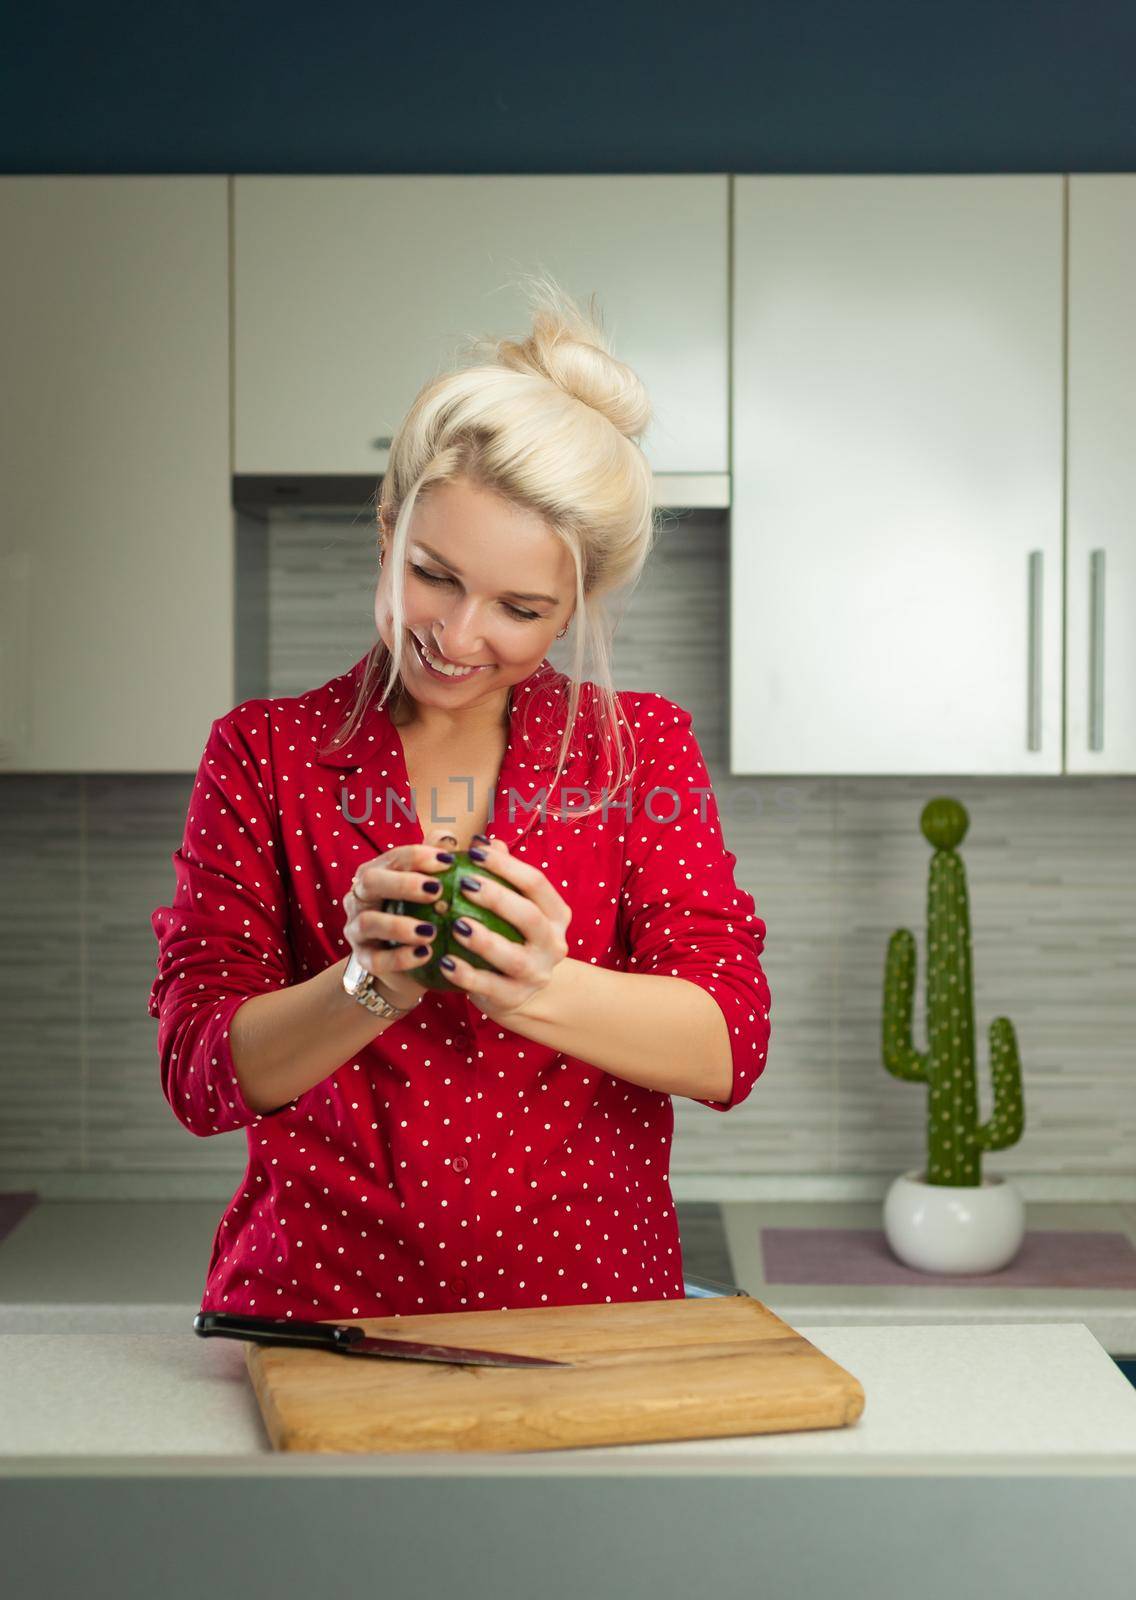 blonde vegan woman cuts avocado in kitchen by Rotozey